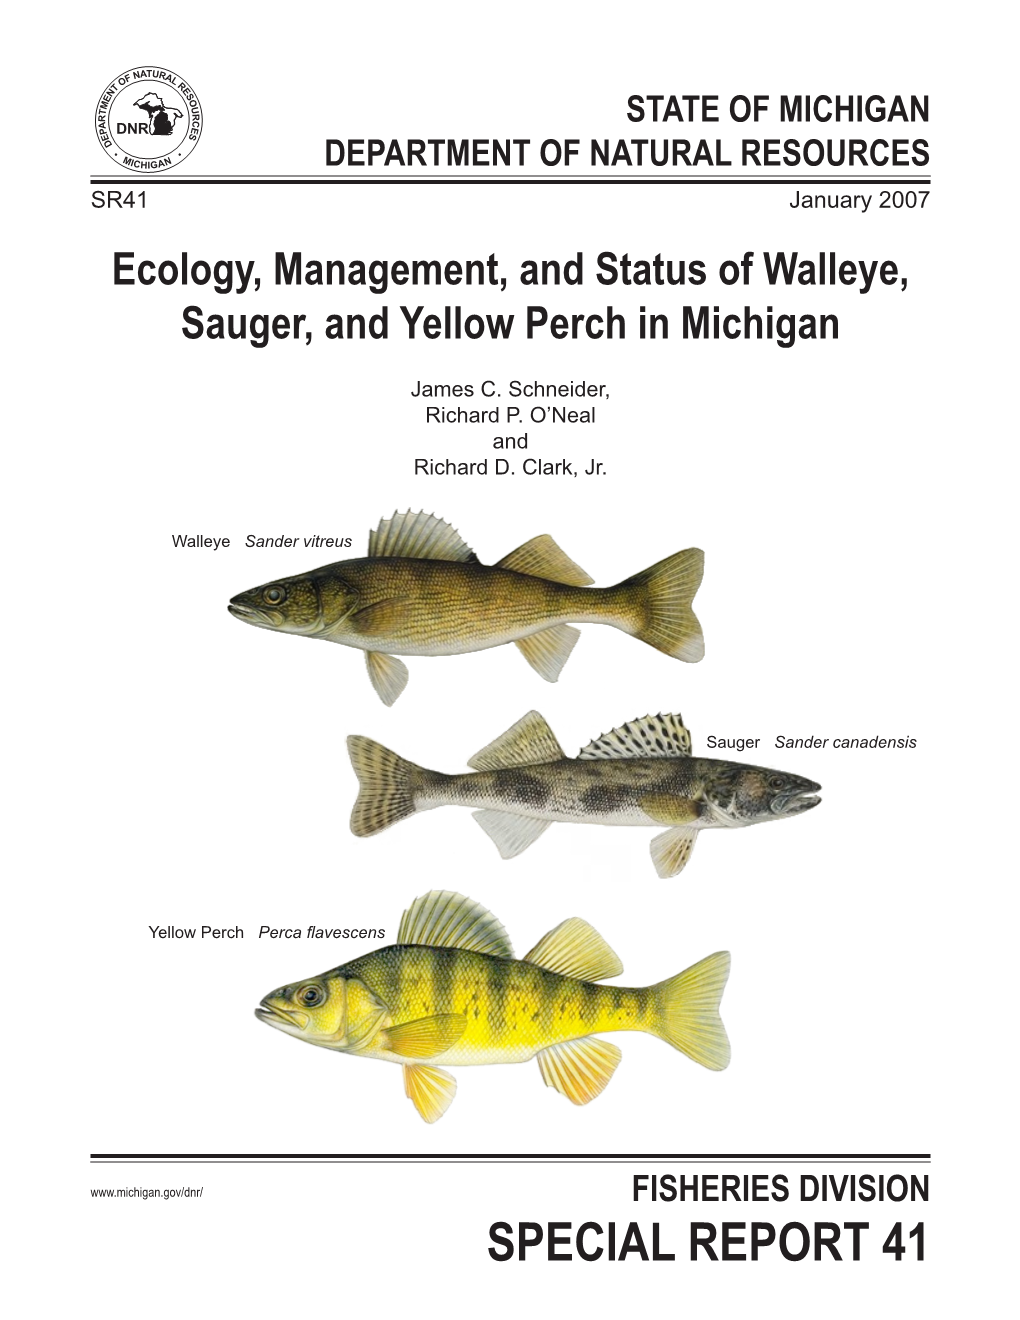 Ecology, Management, and Status of Walleye, Sauger, and Yellow Perch in Michigan